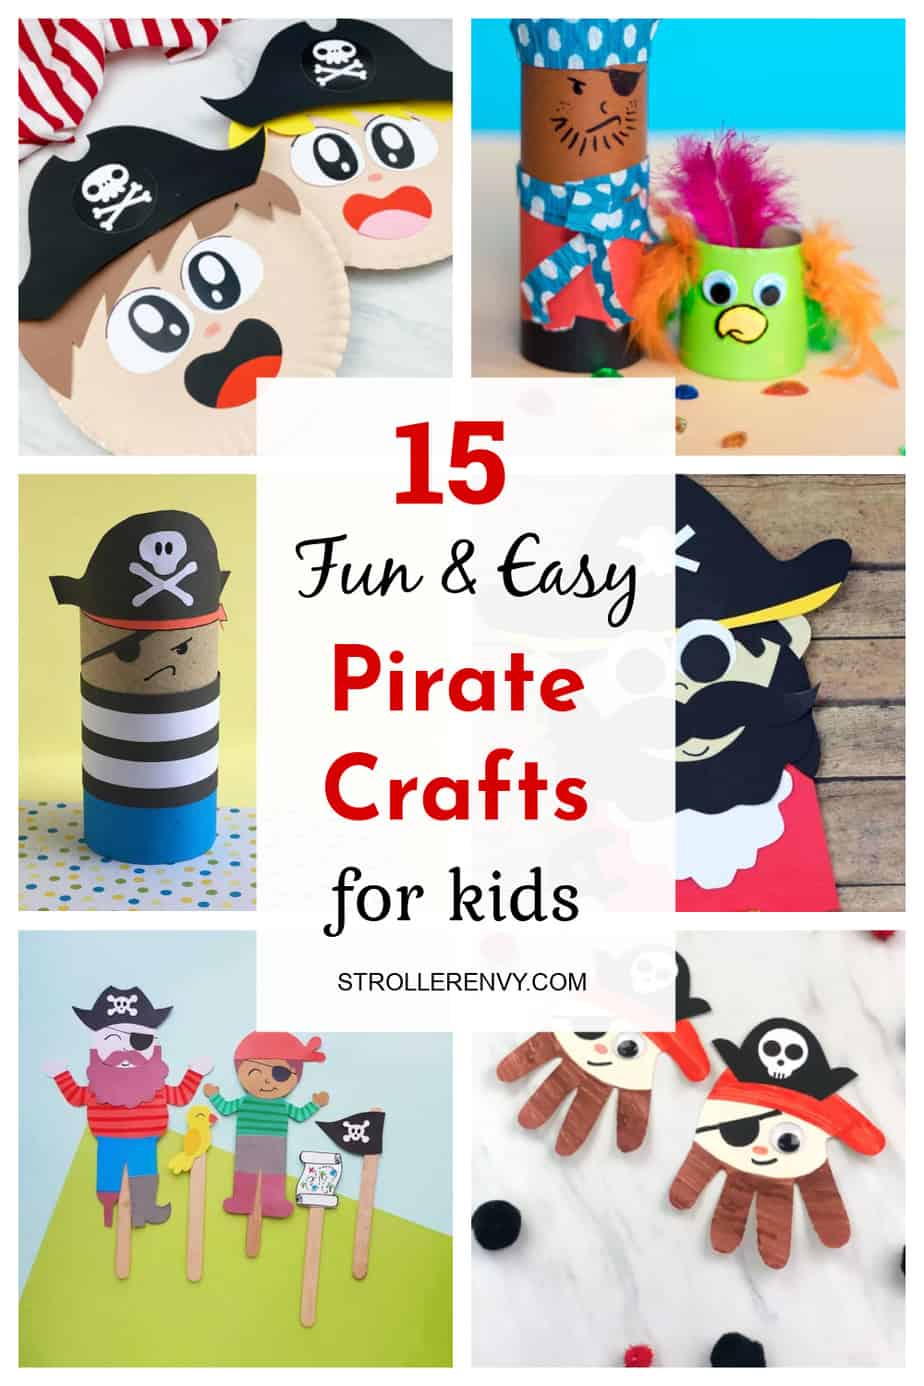 15 Fun & Easy Pirate Crafts for Kids